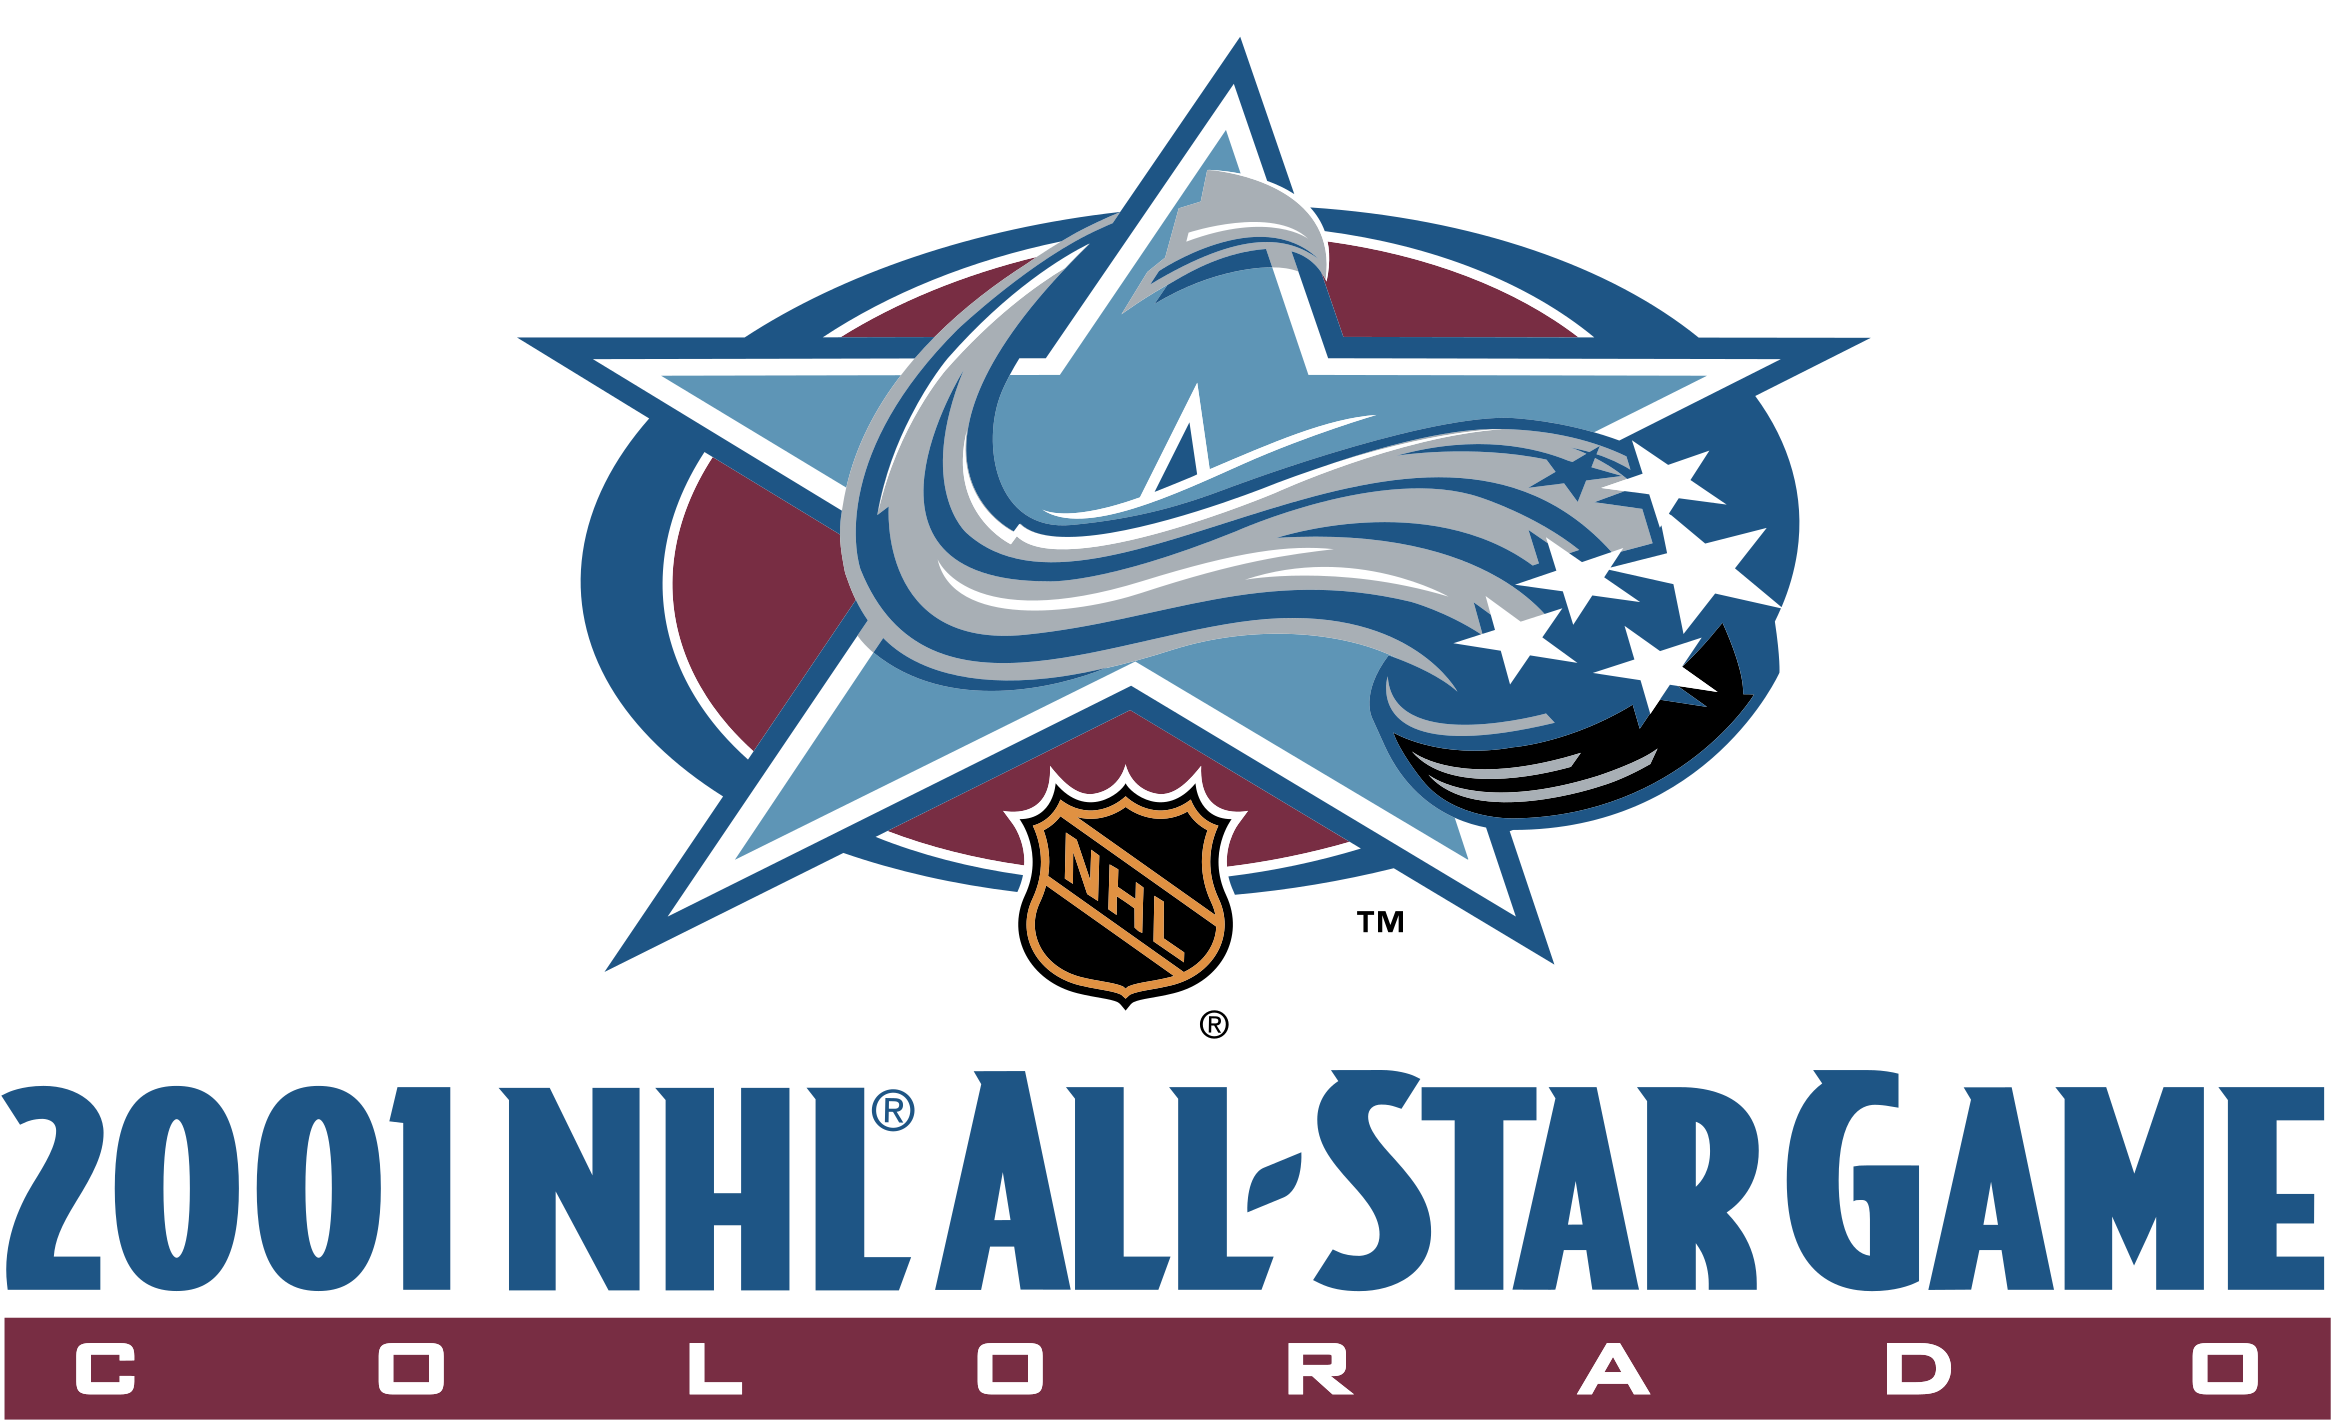 Nhl All Star Game 2001 Logo Png Transparent - Graphic Design Clipart (2400x2400), Png Download